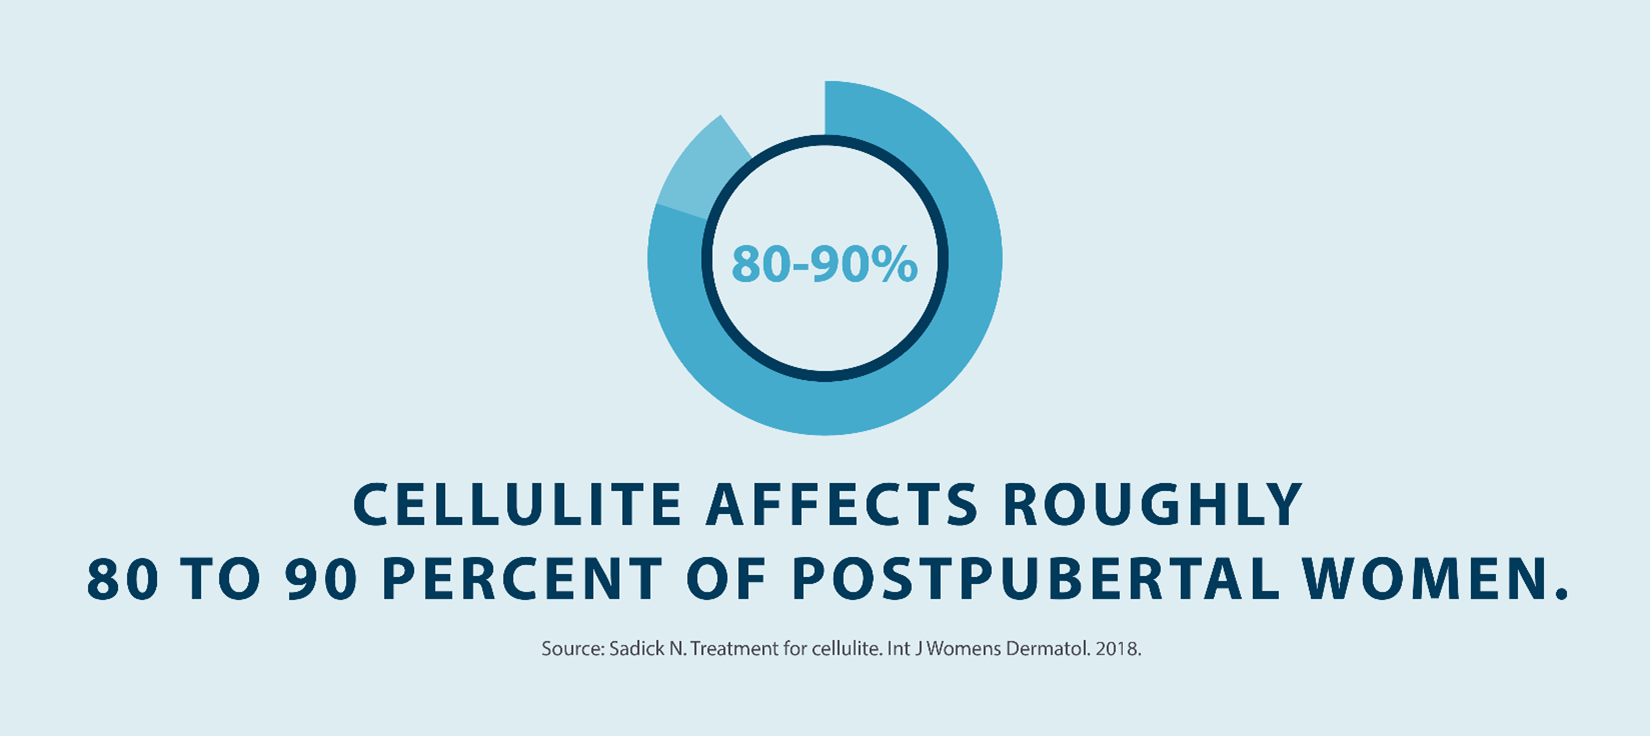 cellulite affects roughly 80 - 90 percent of postpubertal women